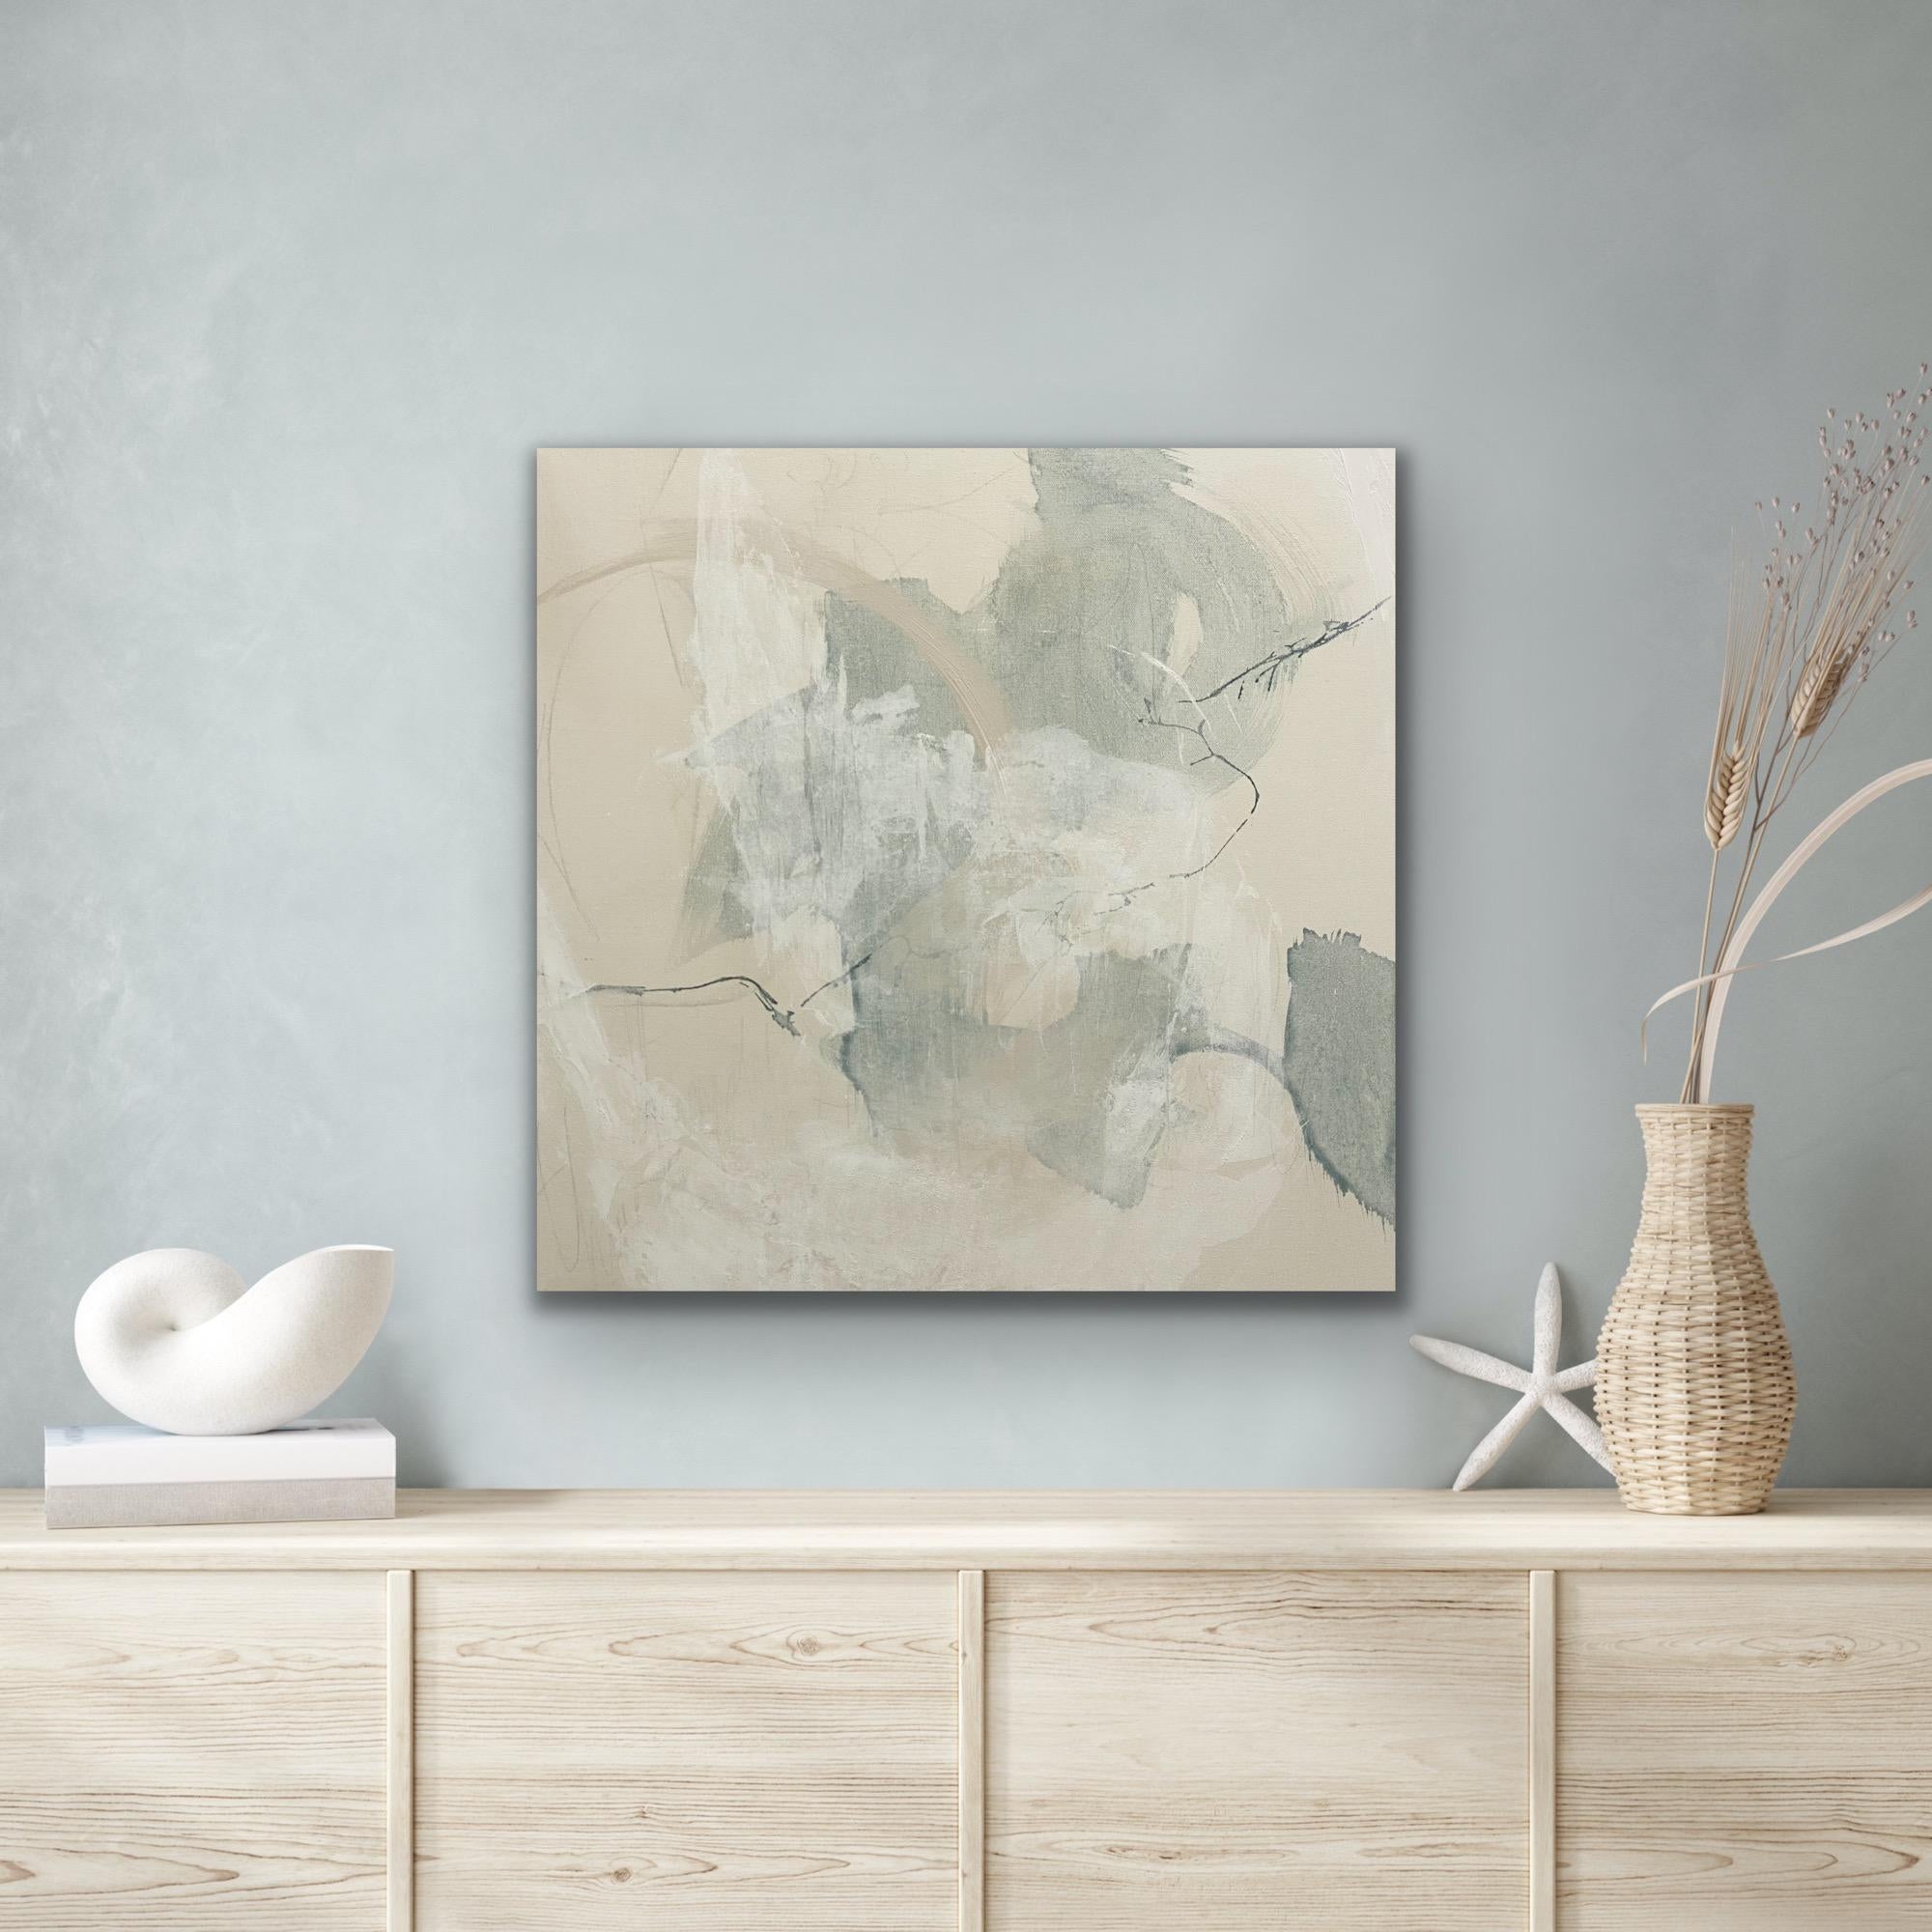 Articulate 7, contemporary abstract, seafoam, tan, white 24x24 inches For Sale 6